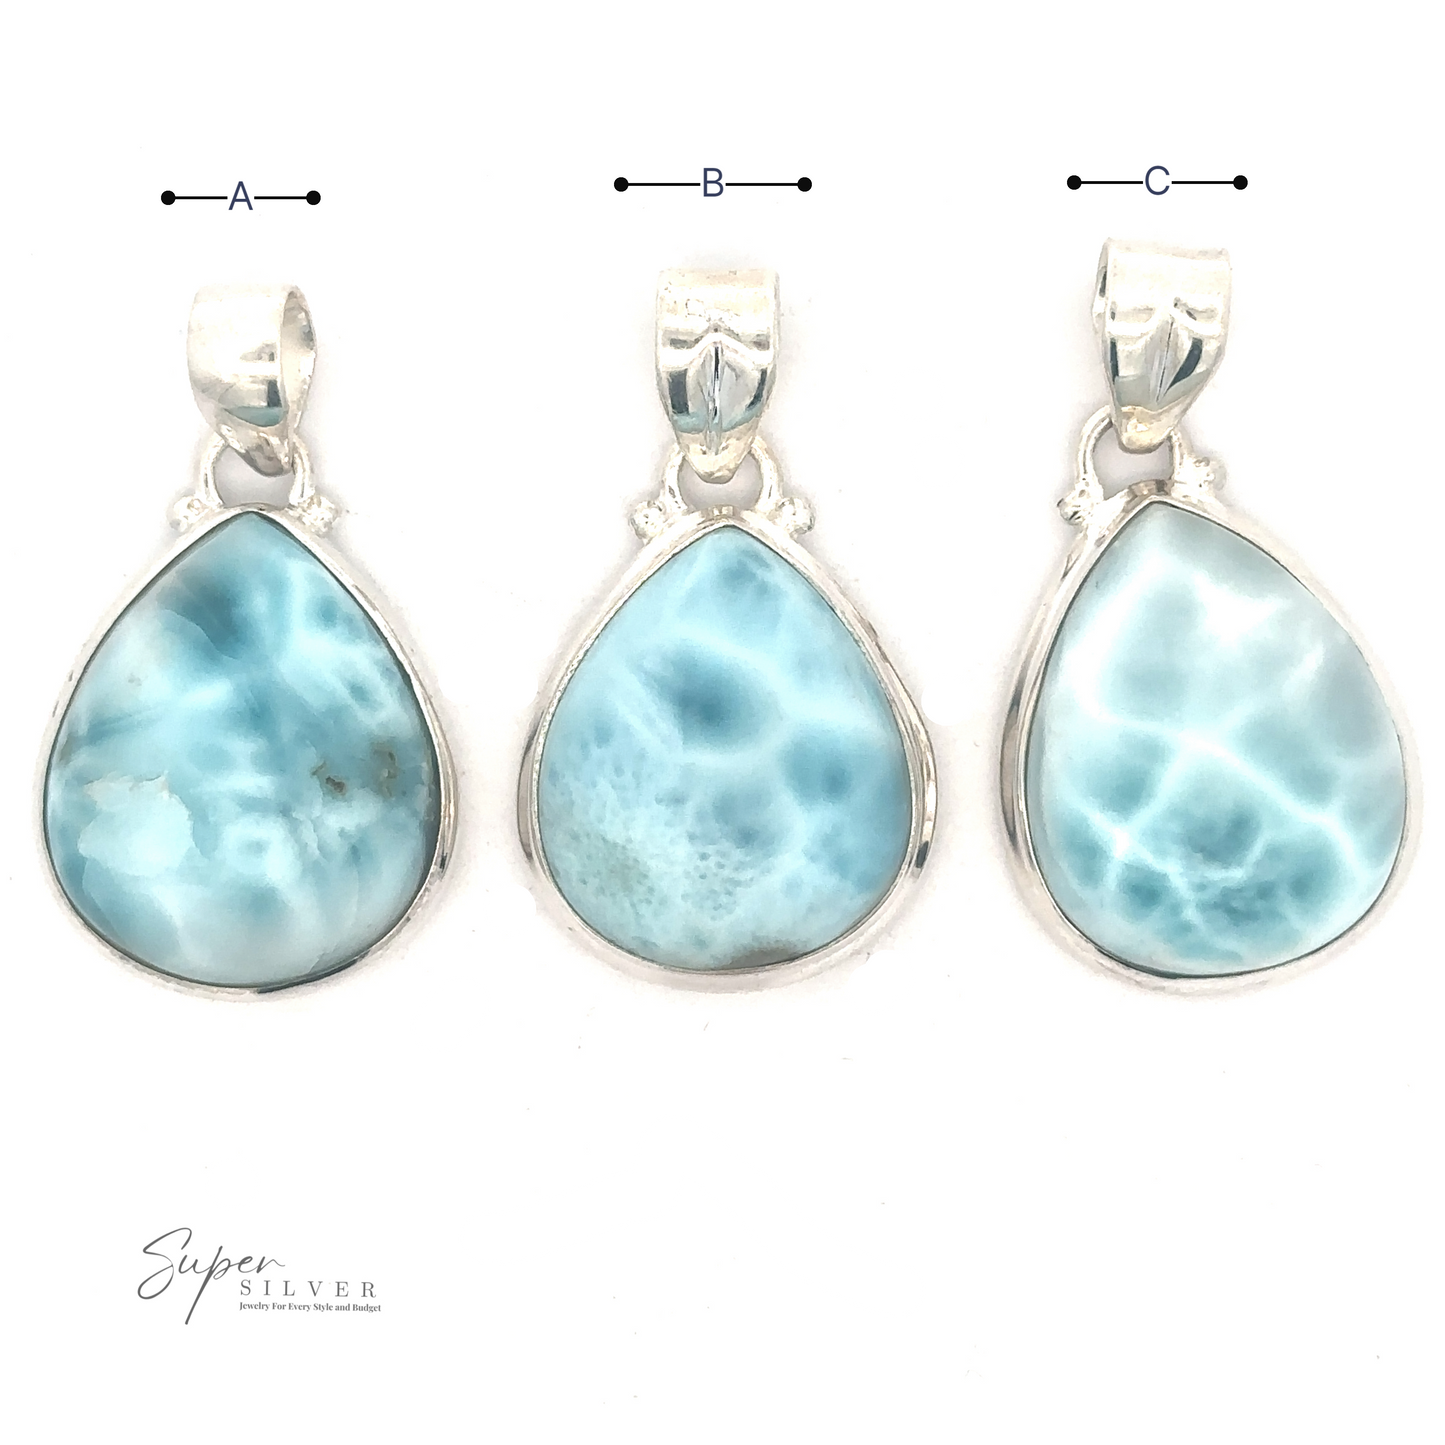 Three teardrop-shaped blue gemstones, reminiscent of Larimar, labeled A, B, and C, set in sterling silver pendants, displayed on a white background. The pendants are from Super Silver, as noted by the logo in the lower left corner. Each is a Small Teardrop Larimar Pendant—perfect for a night out.